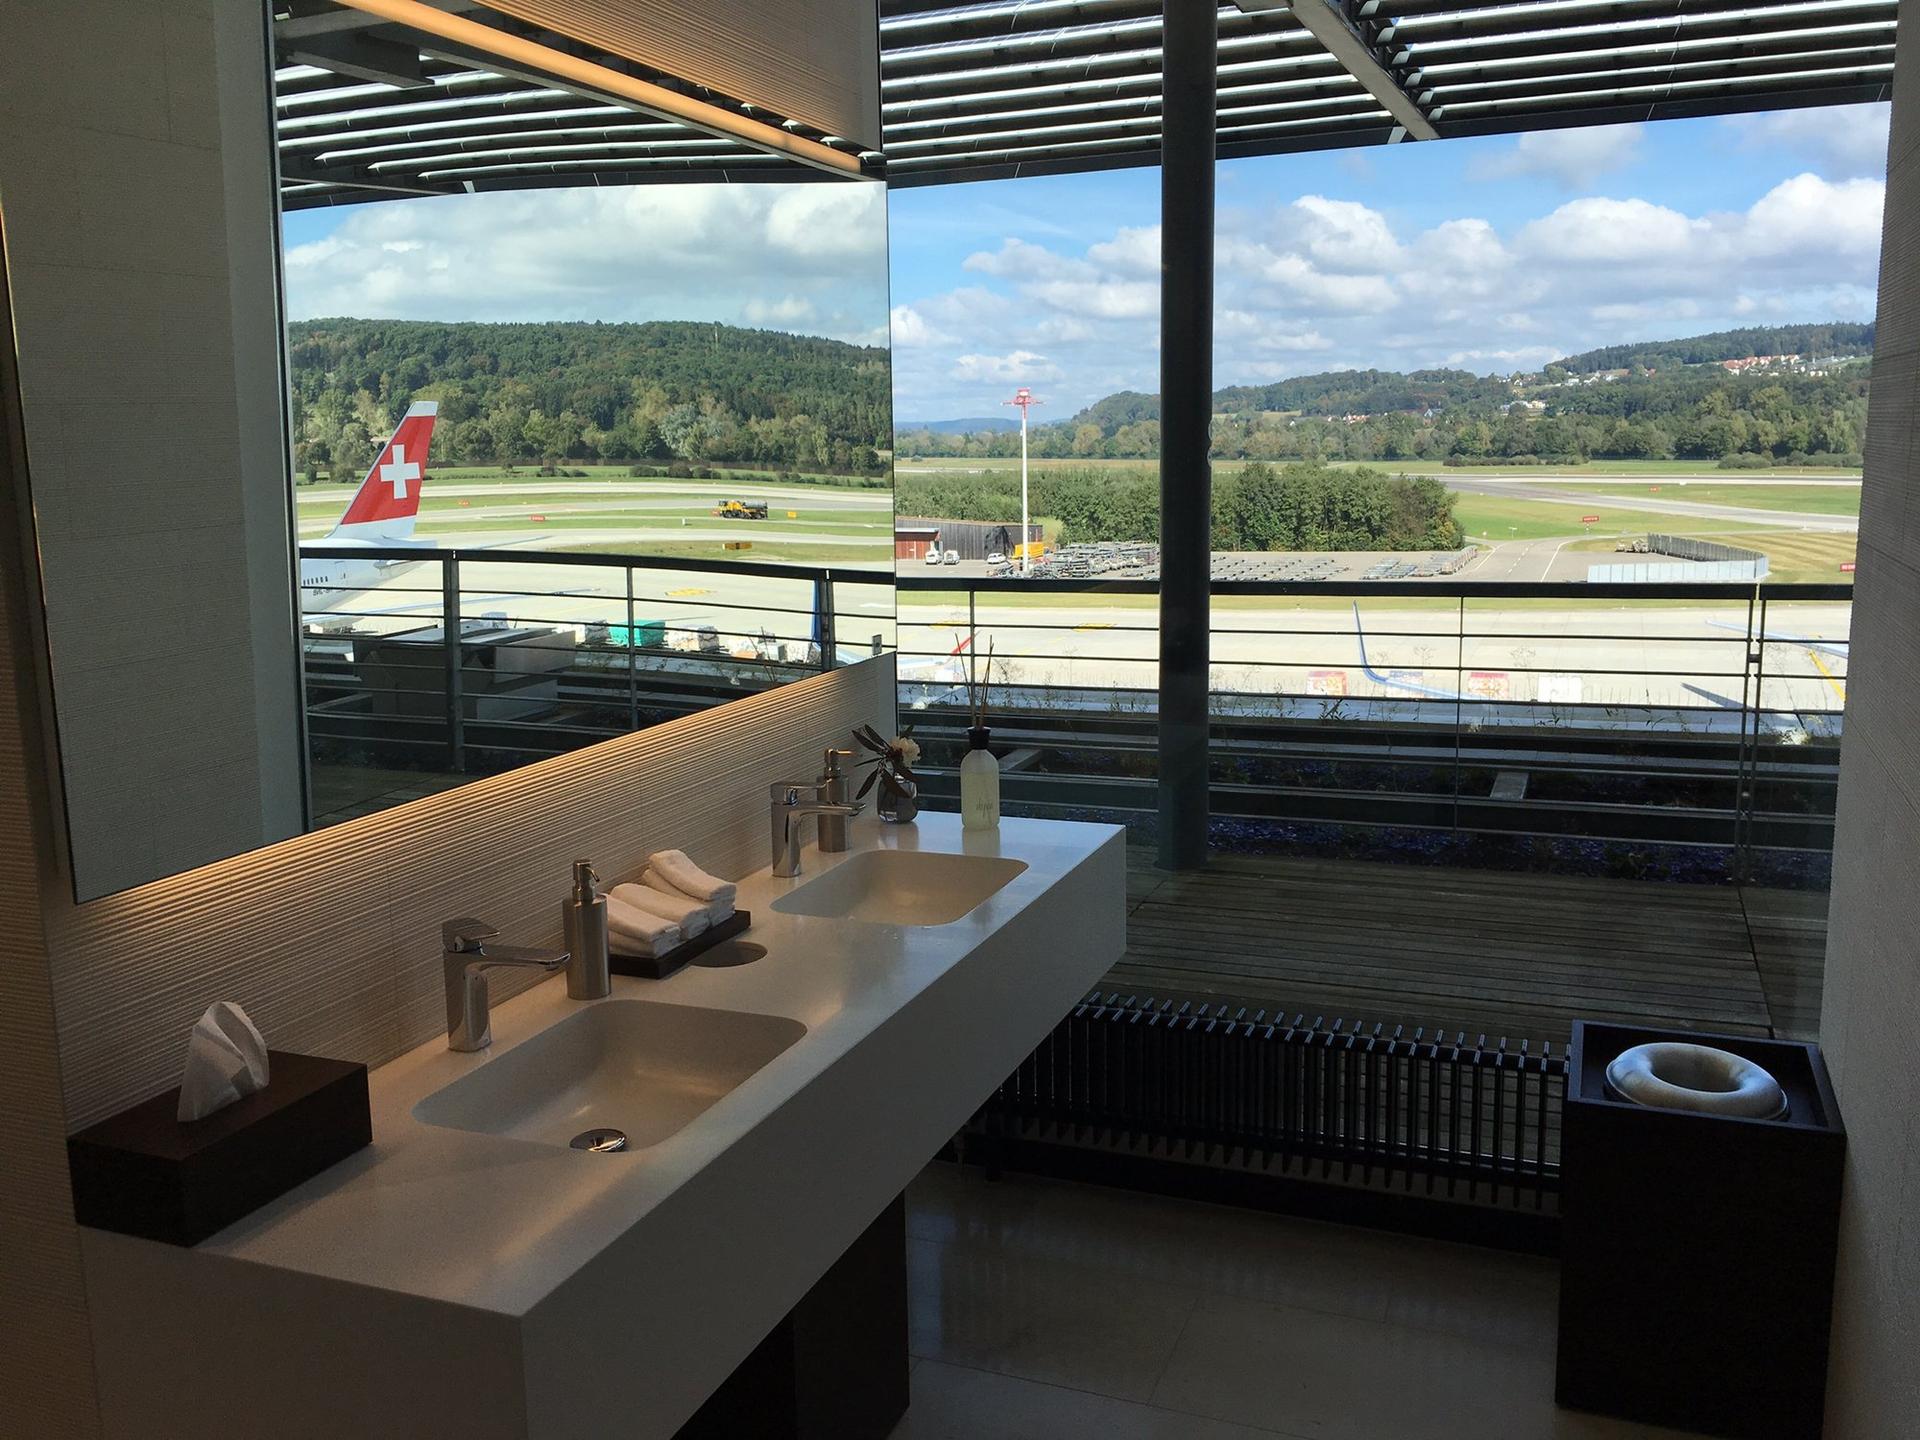 SWISS First Lounge image 1 of 8